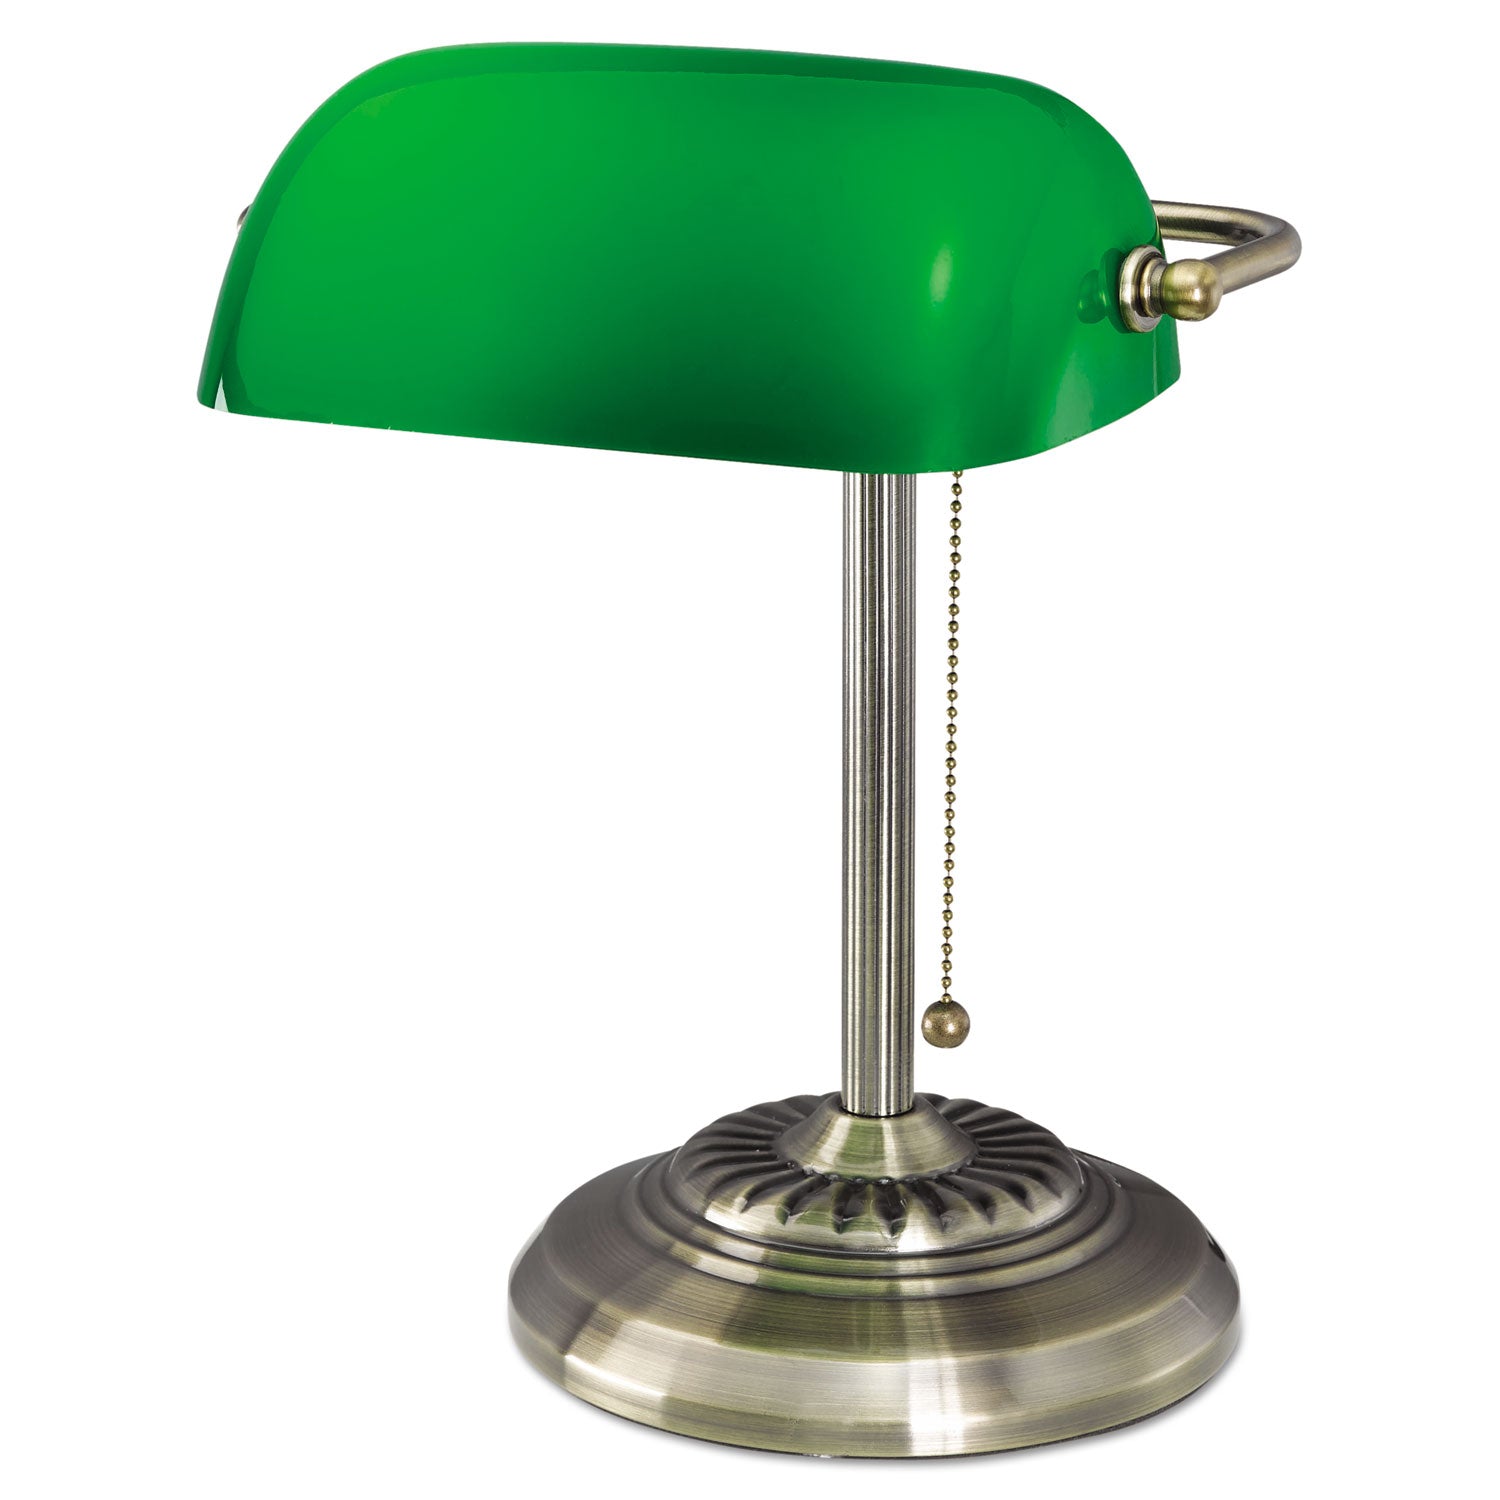 traditional-bankers-lamp-green-glass-shade-105w-x-11d-x-13h-antique-brass_alelmp557ab - 1